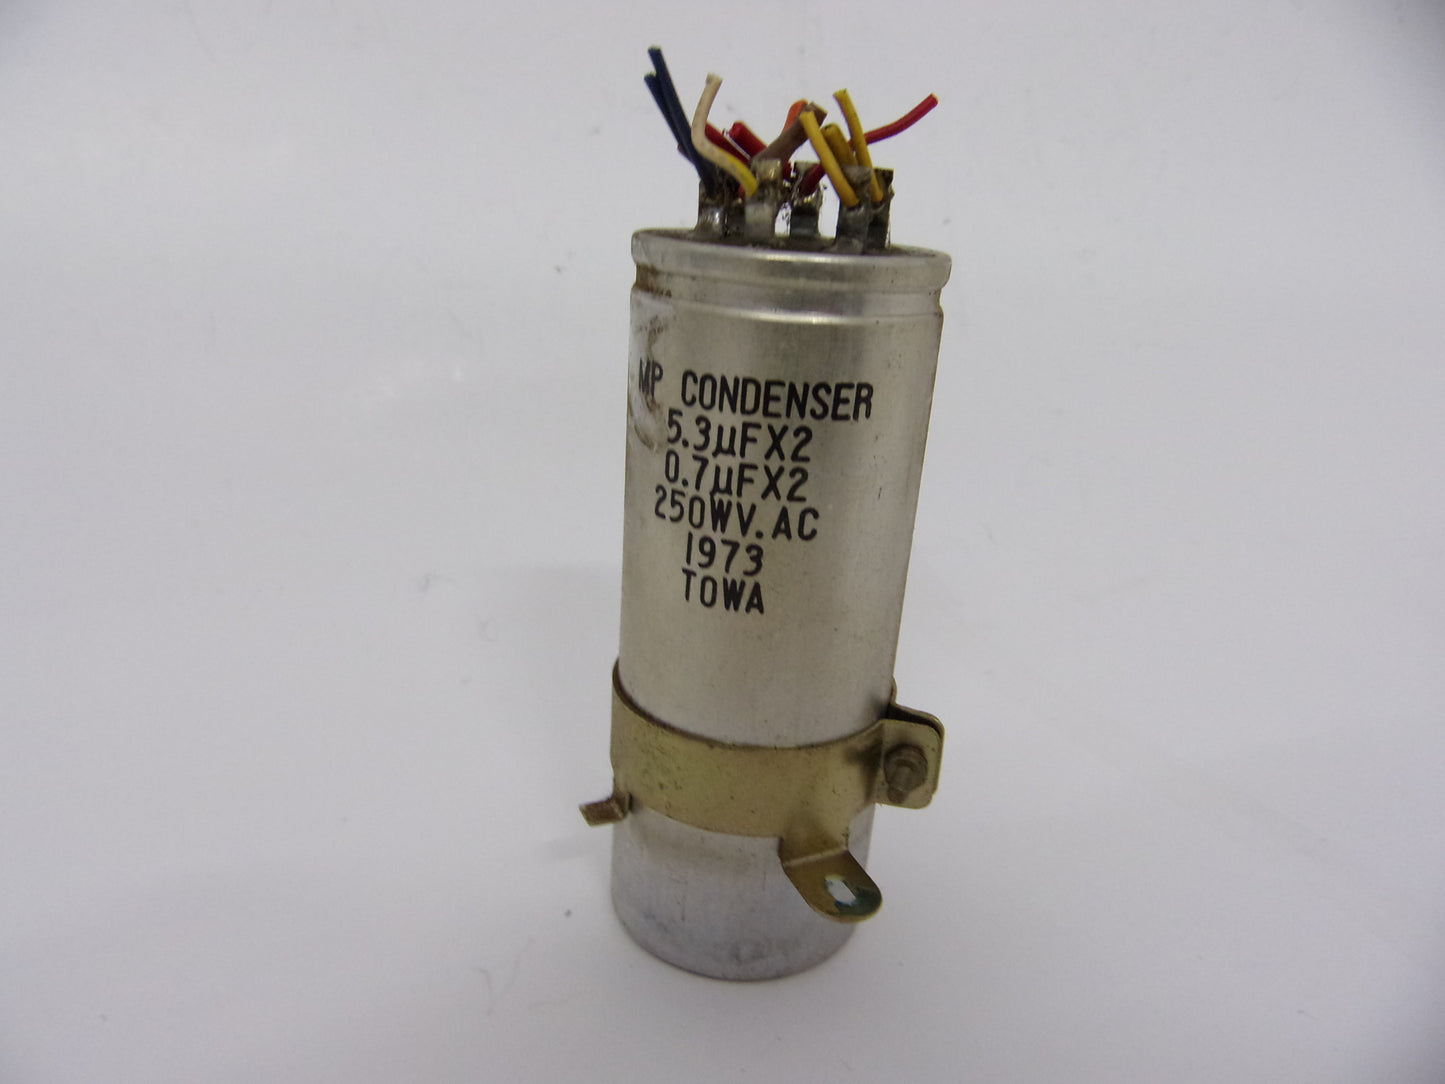 Towa Capacitor for Teac A3340 5.3uf x2 0.7uf x2